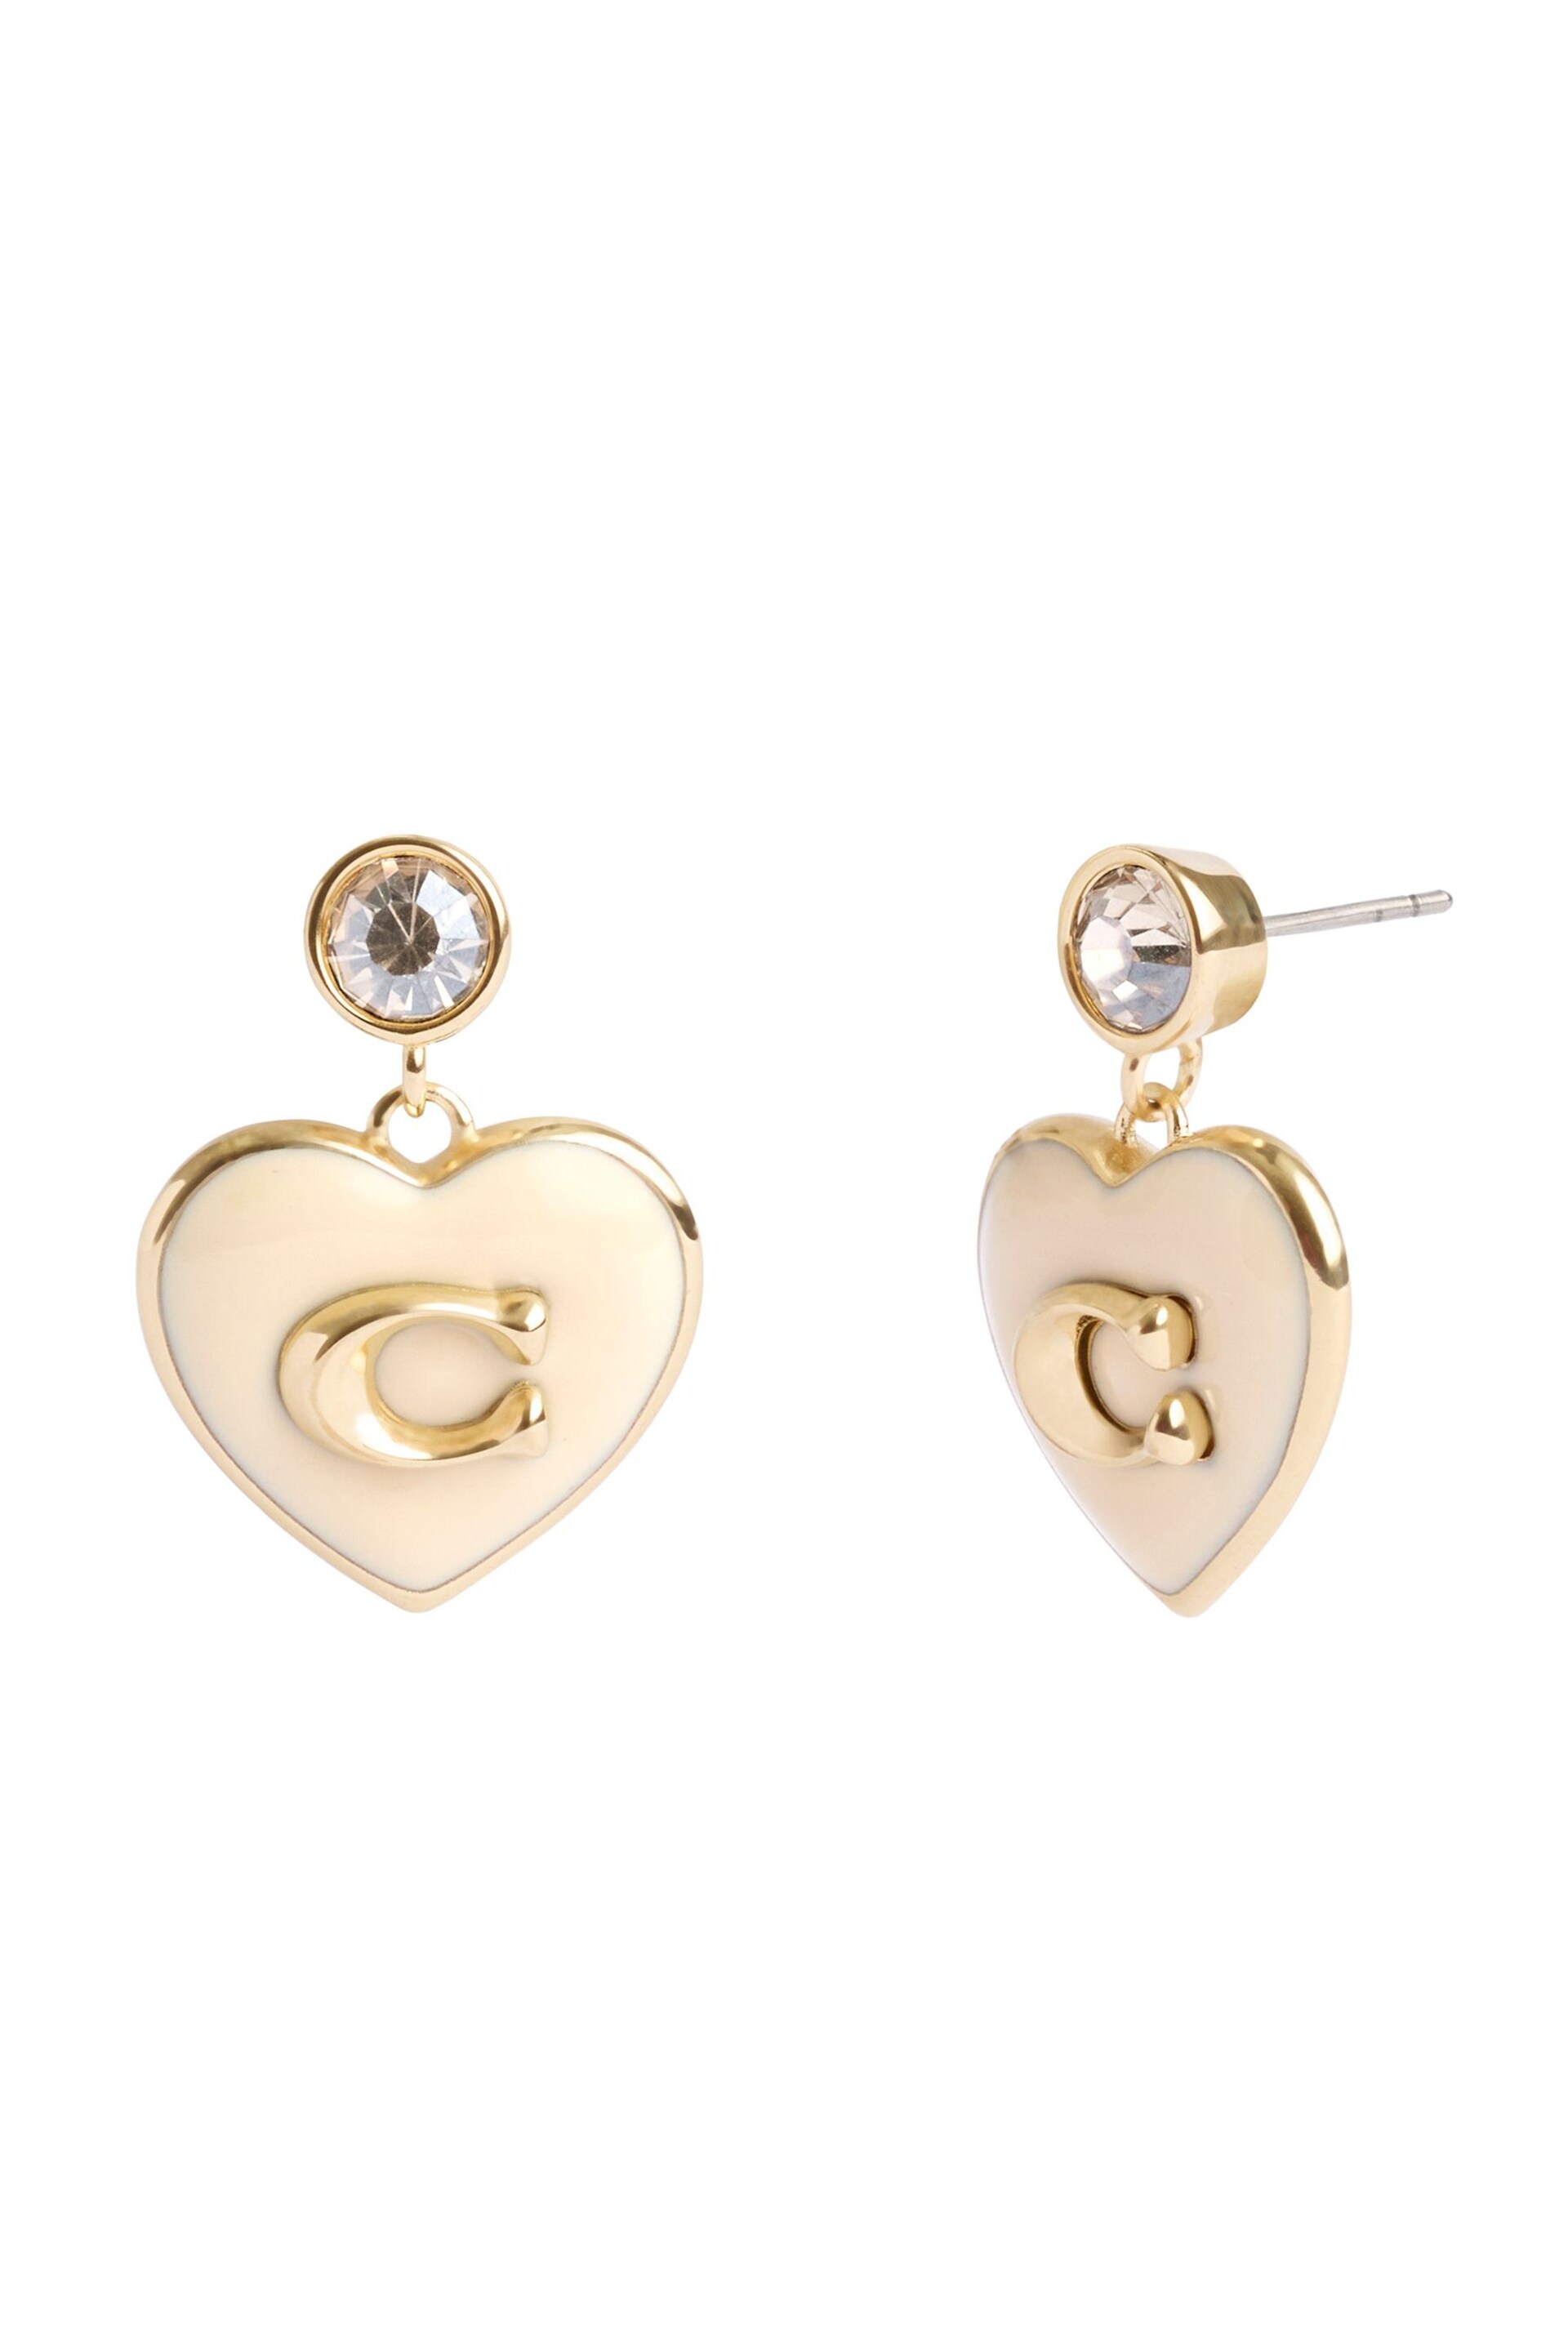 COACH Gold Tone Signature Heart Drop Boxed Earrings - Image 2 of 2